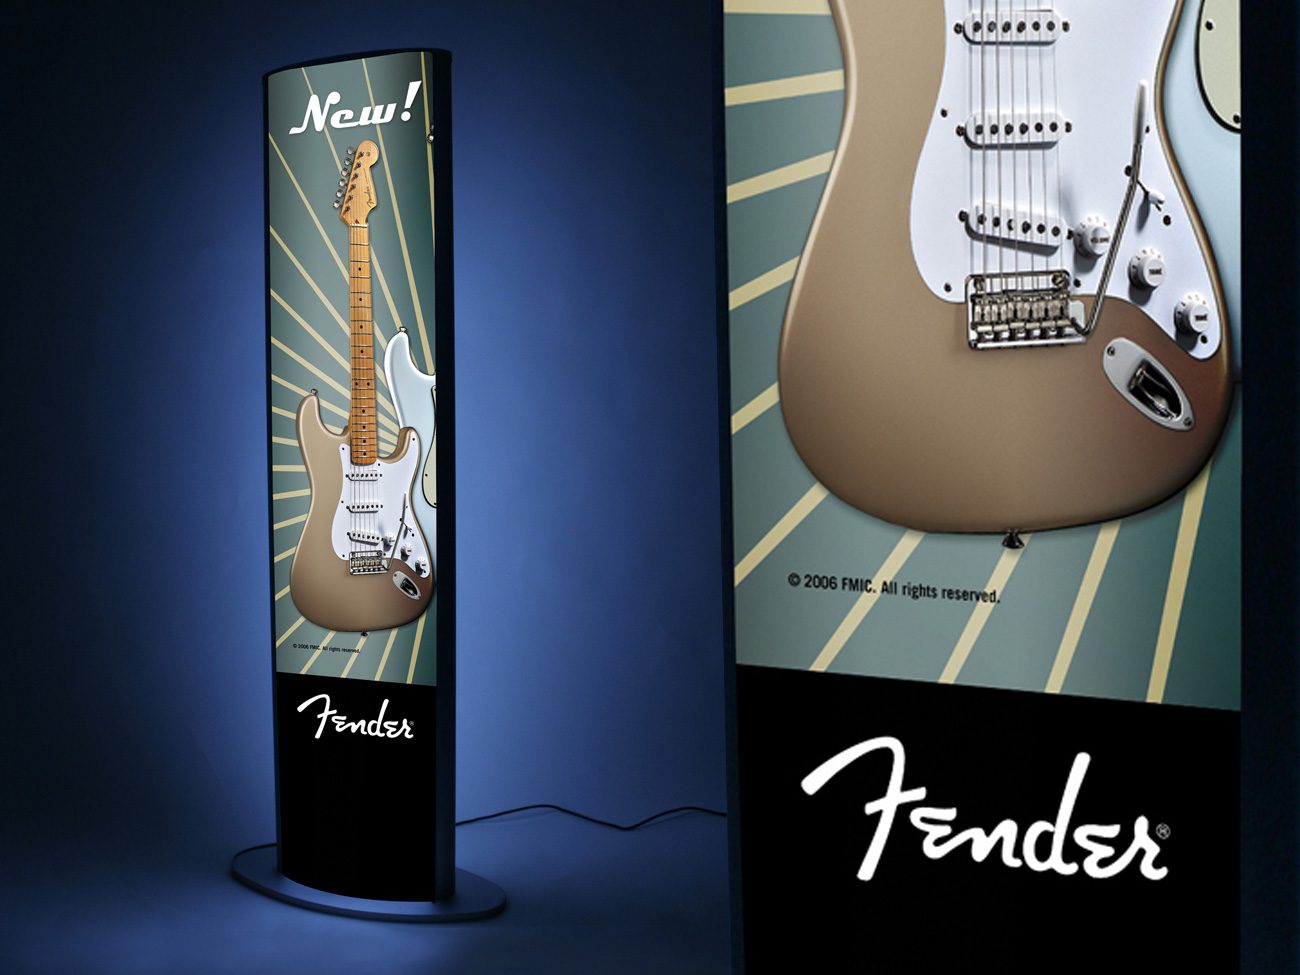 Fender Point of Sale